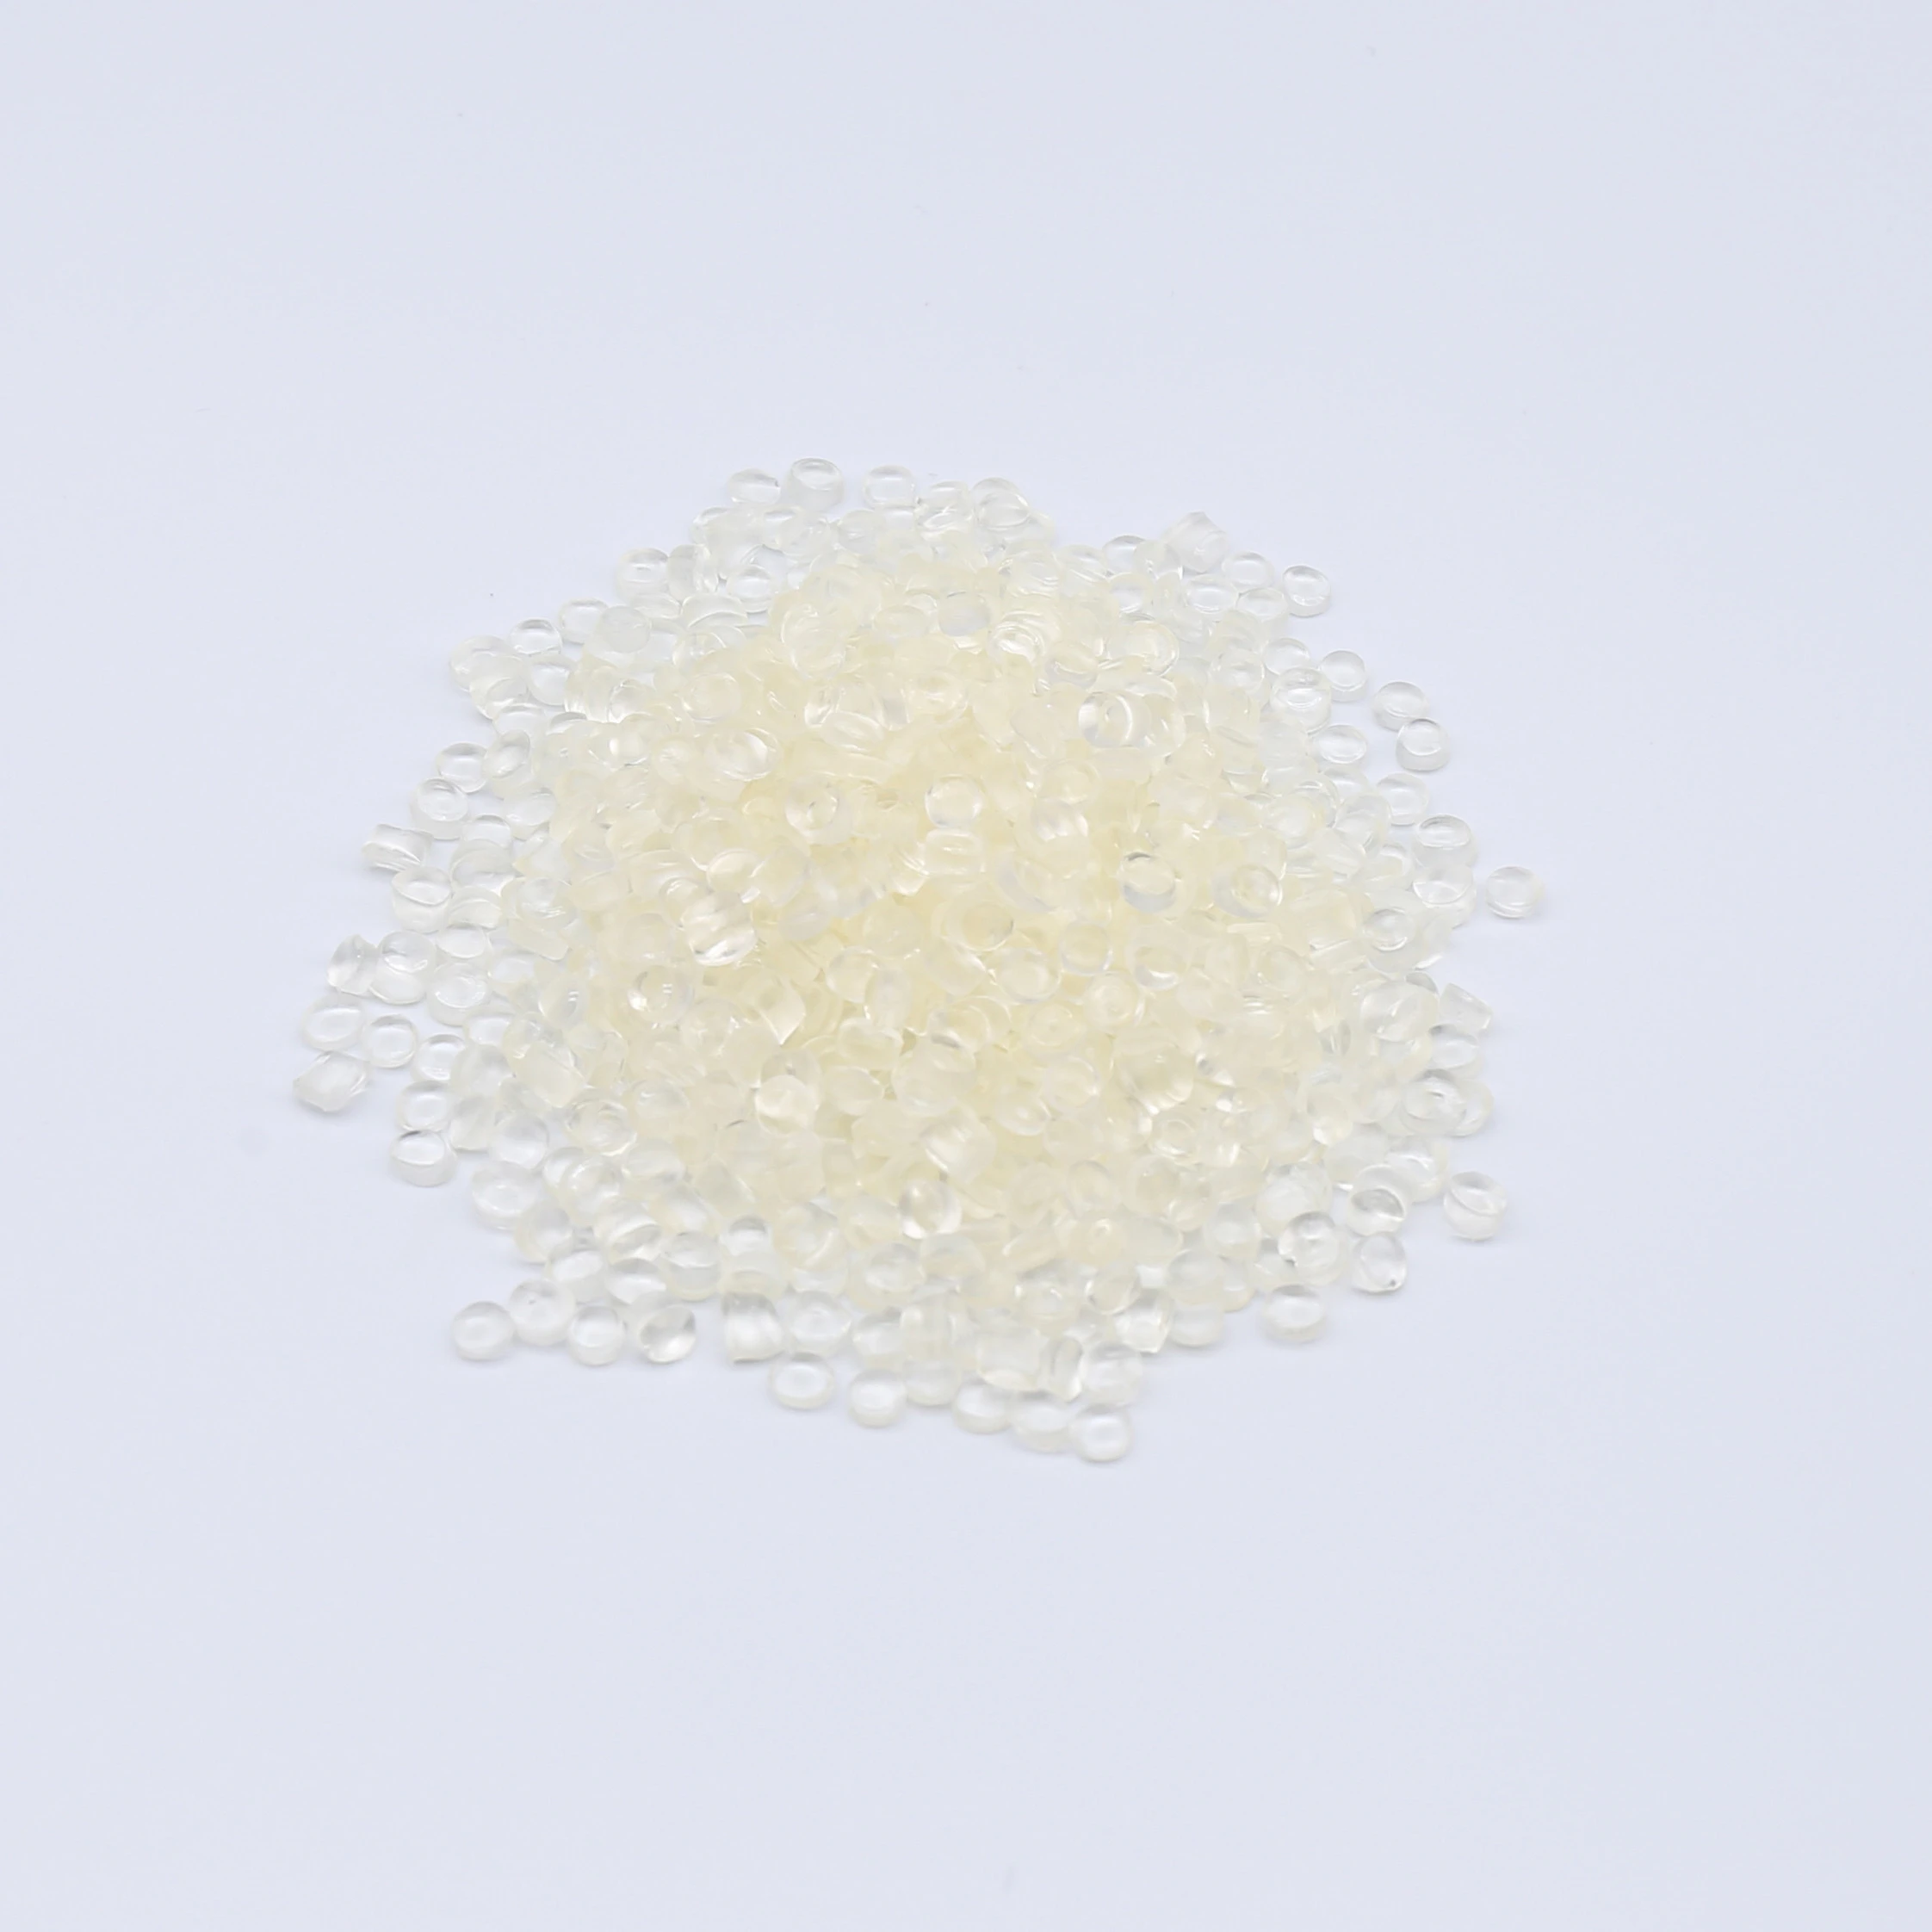 TPE raw material Raw material particles